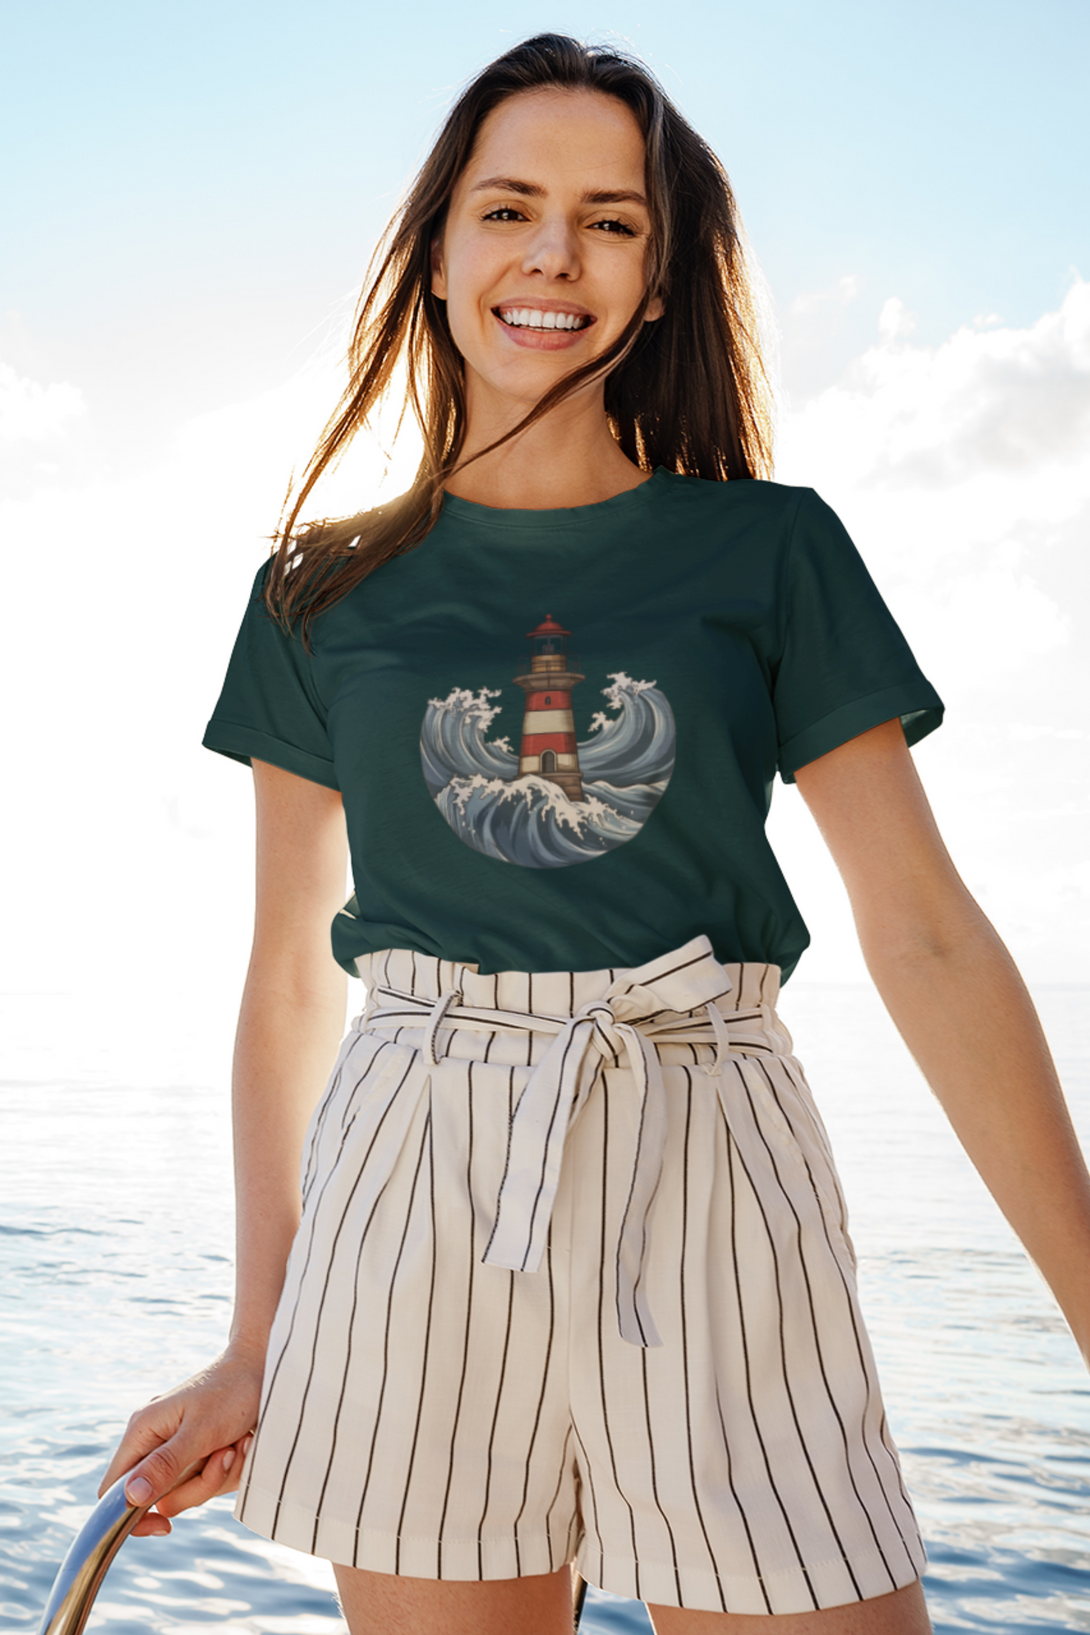 Lighthouse And Waves Printed T-Shirt For Women - WowWaves - 3